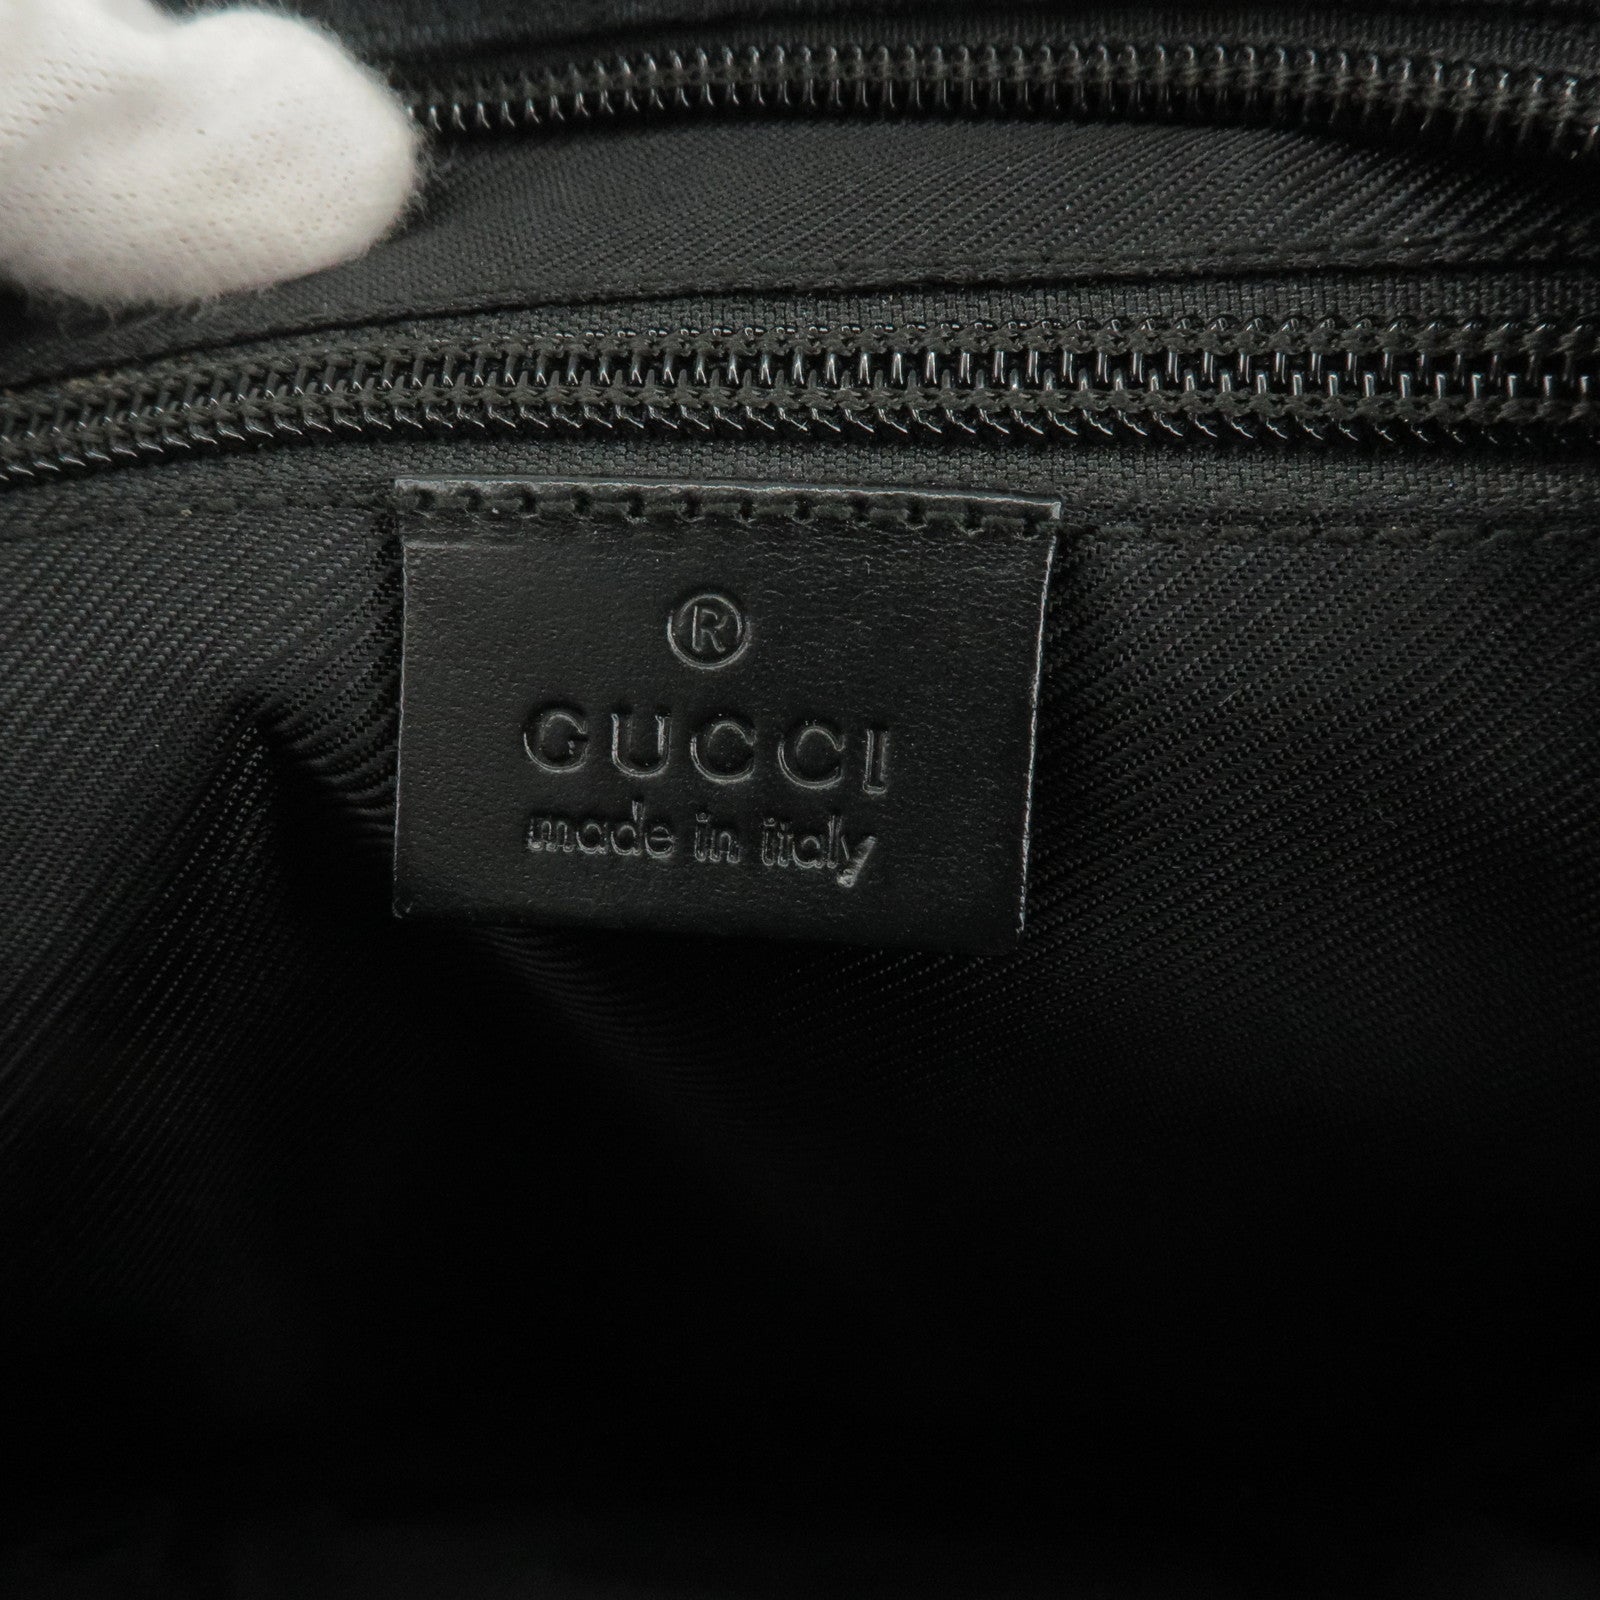 Shop GUCCI Canvas 2WAY Logo Outlet Bags by momochani